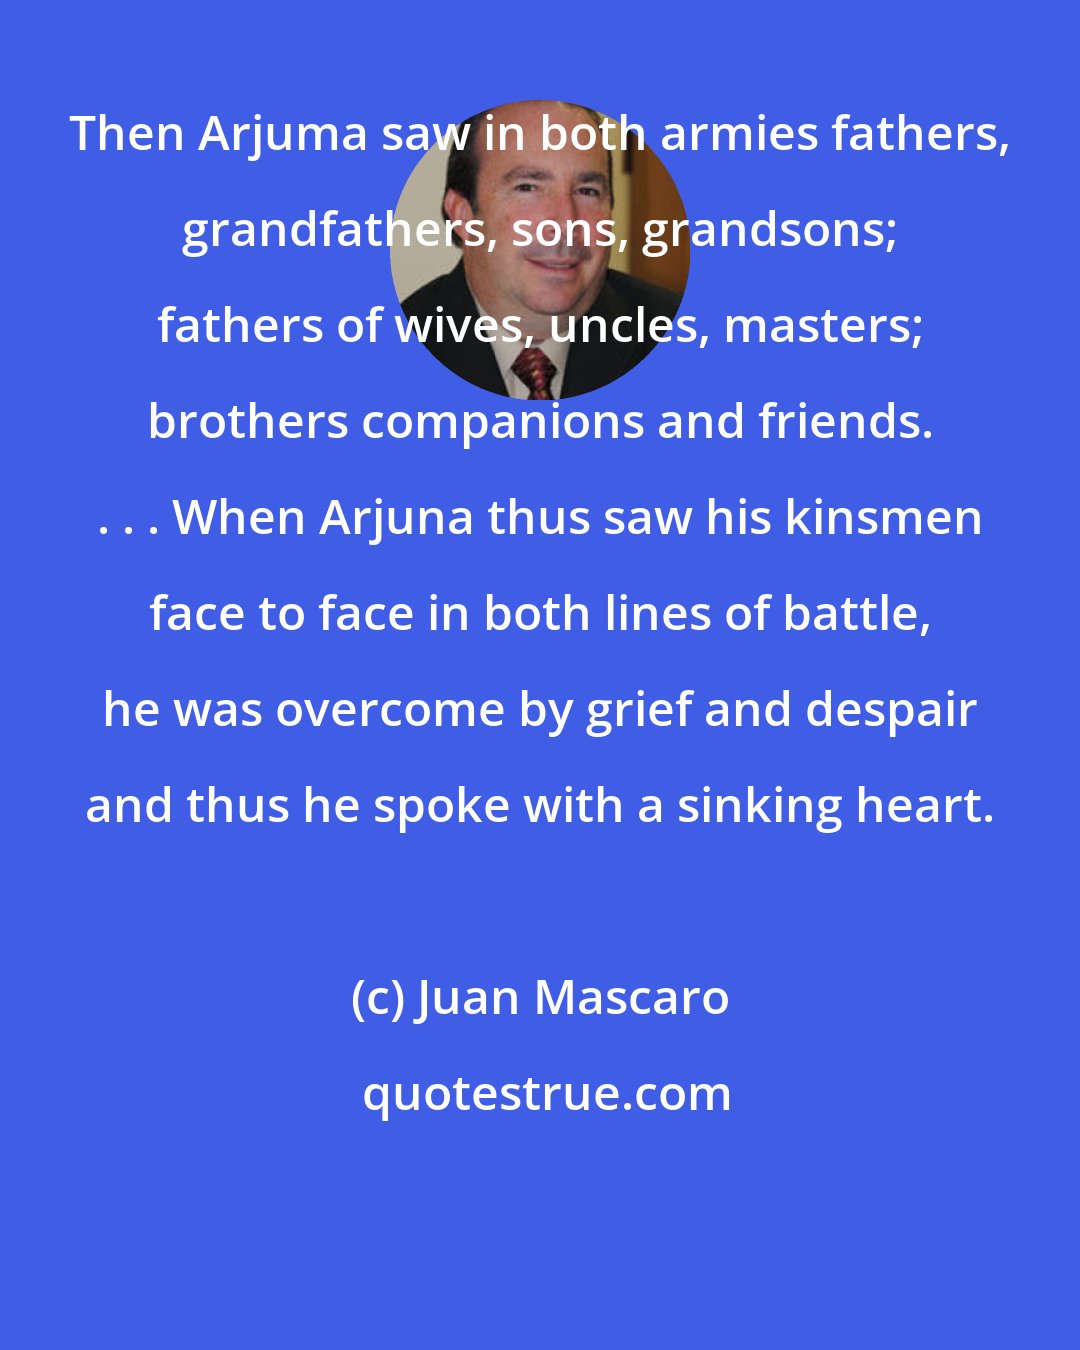 Juan Mascaro: Then Arjuma saw in both armies fathers, grandfathers, sons, grandsons; fathers of wives, uncles, masters; brothers companions and friends. . . . When Arjuna thus saw his kinsmen face to face in both lines of battle, he was overcome by grief and despair and thus he spoke with a sinking heart.